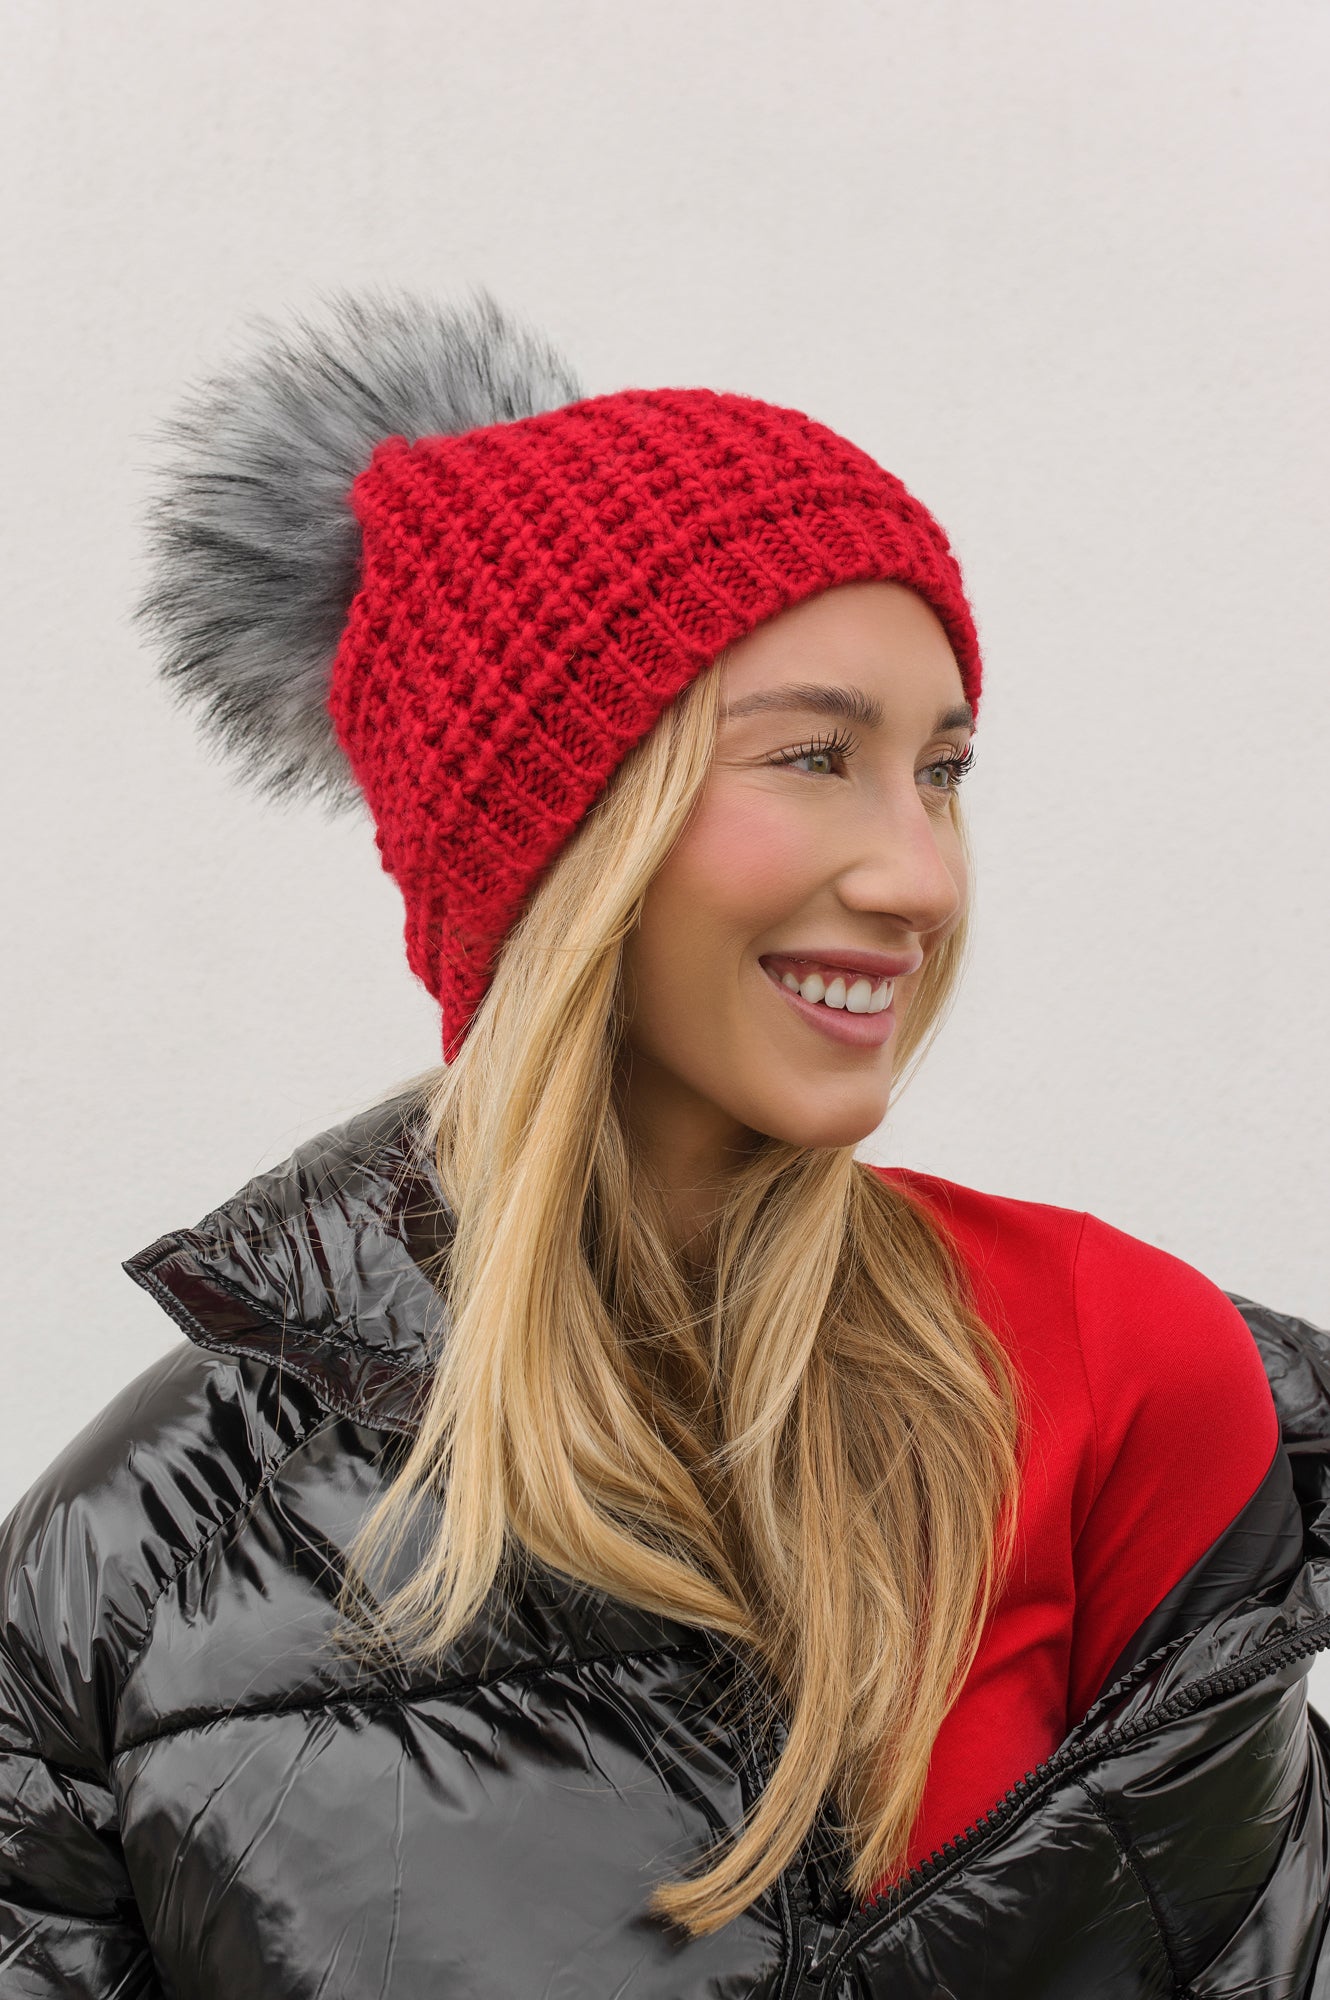 Kyi Kyi Chunky Wool Blend Beanie with Faux Fur Pom in Dove